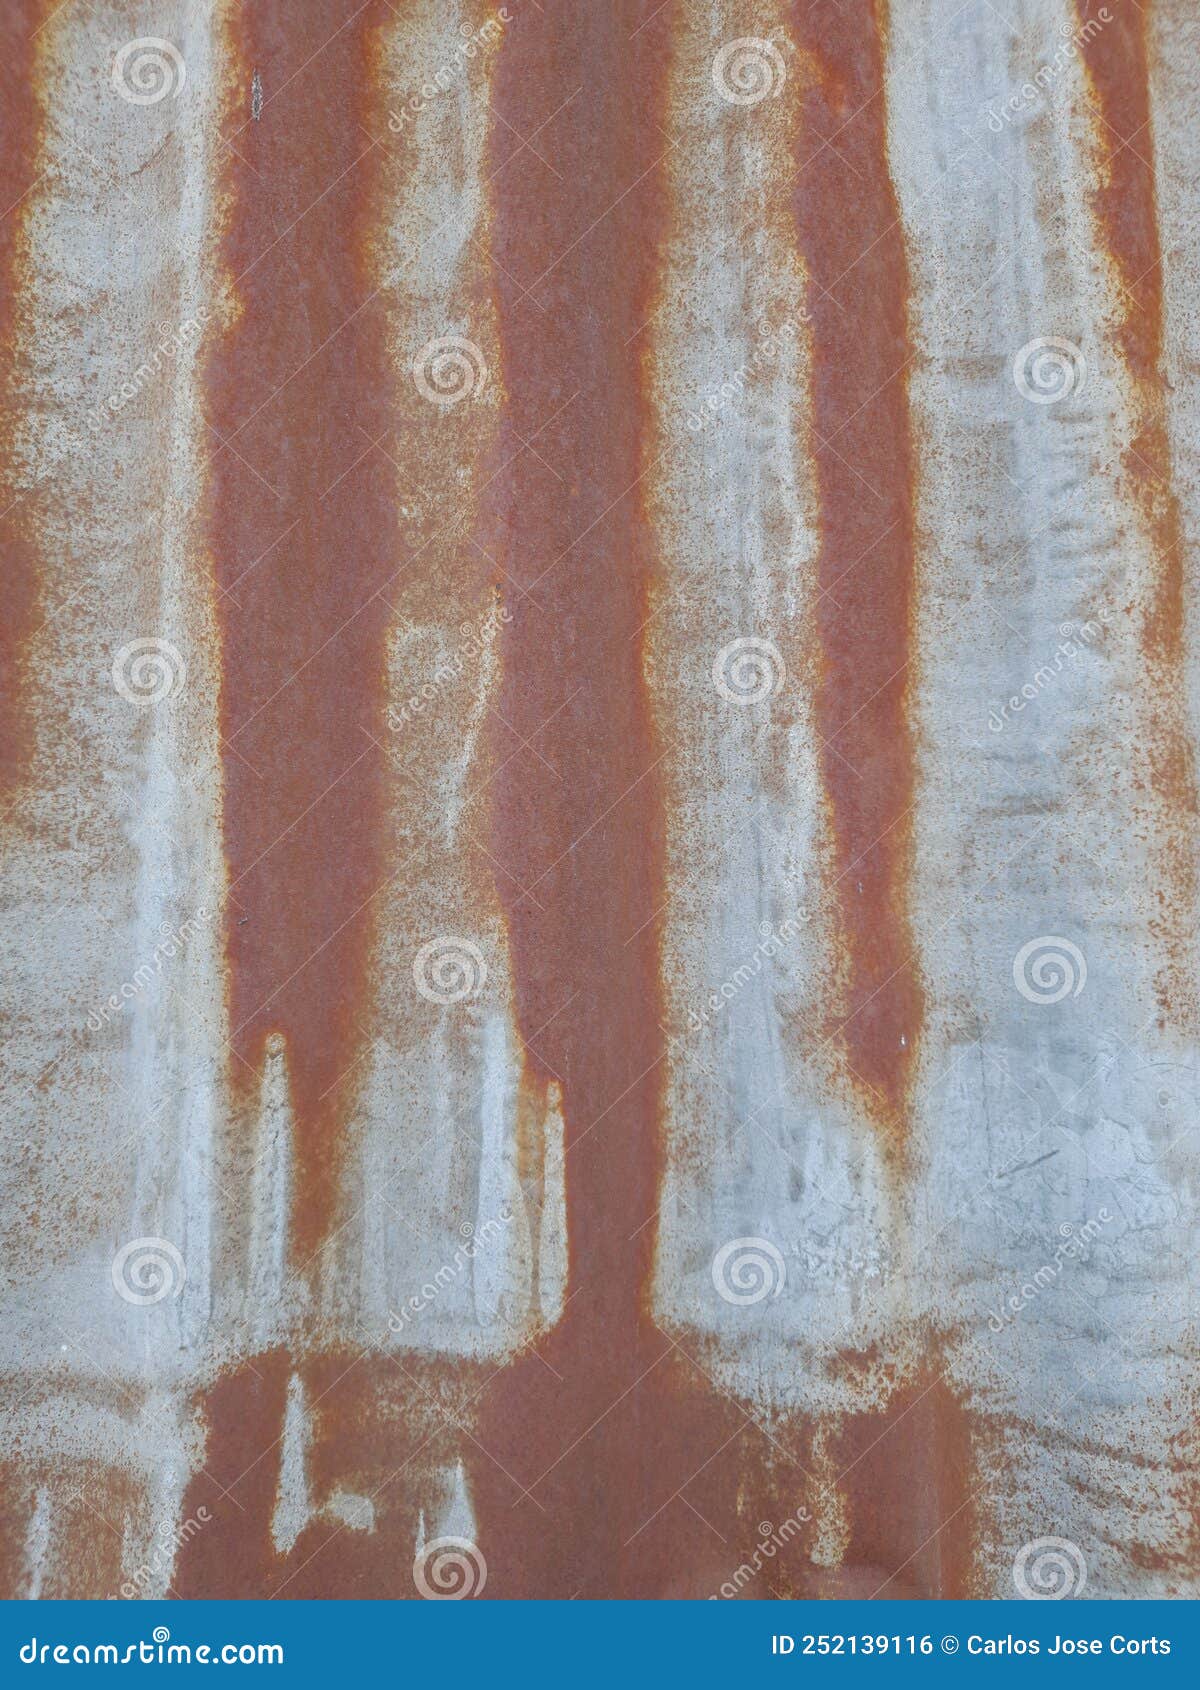 corroded zinc sheet with rust